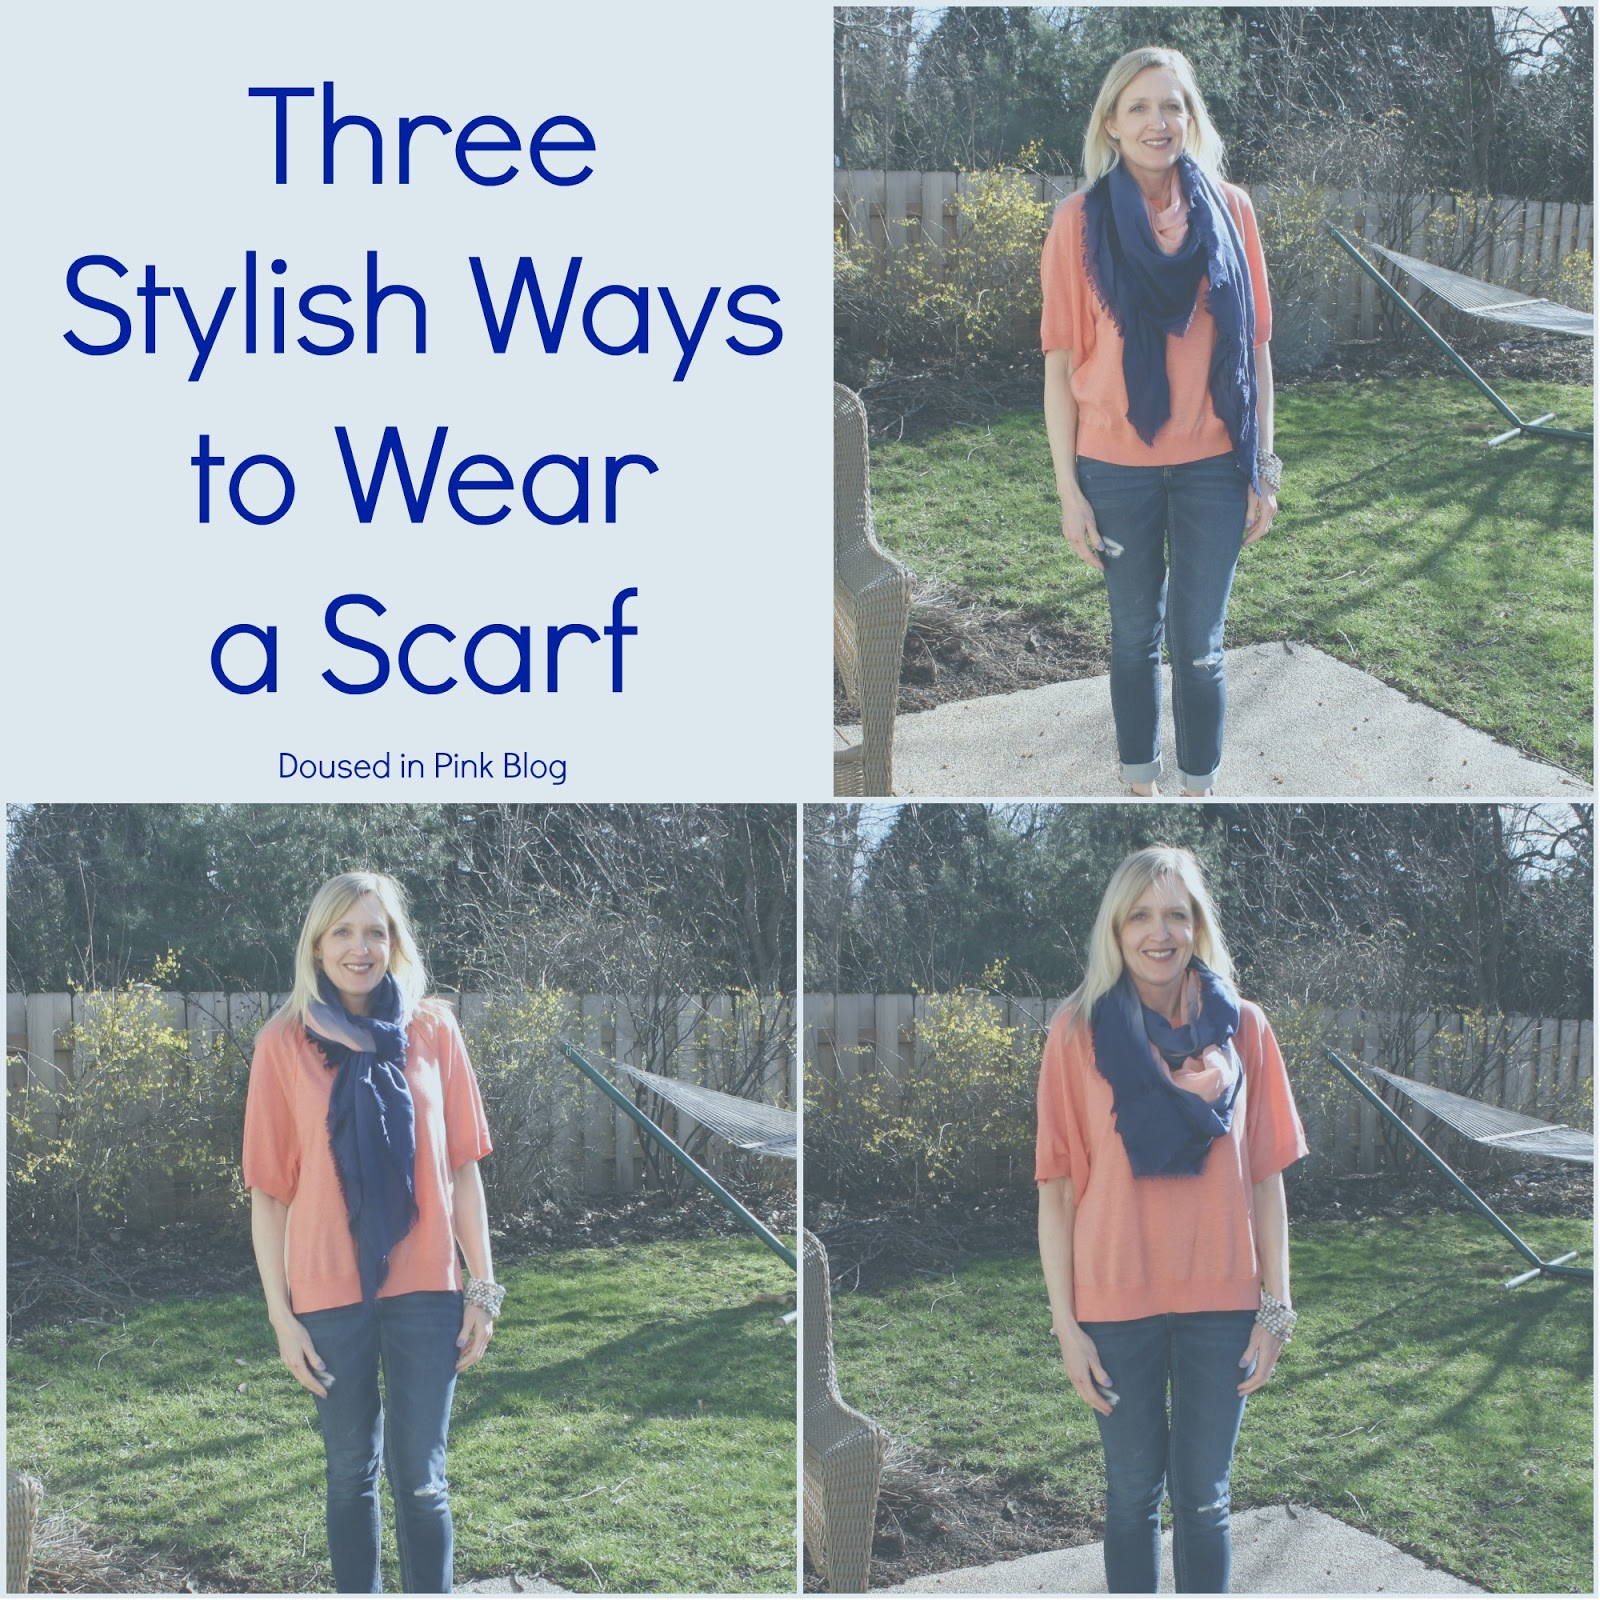 Three Stylish Ways to Wear a Scarf - Doused in Pink